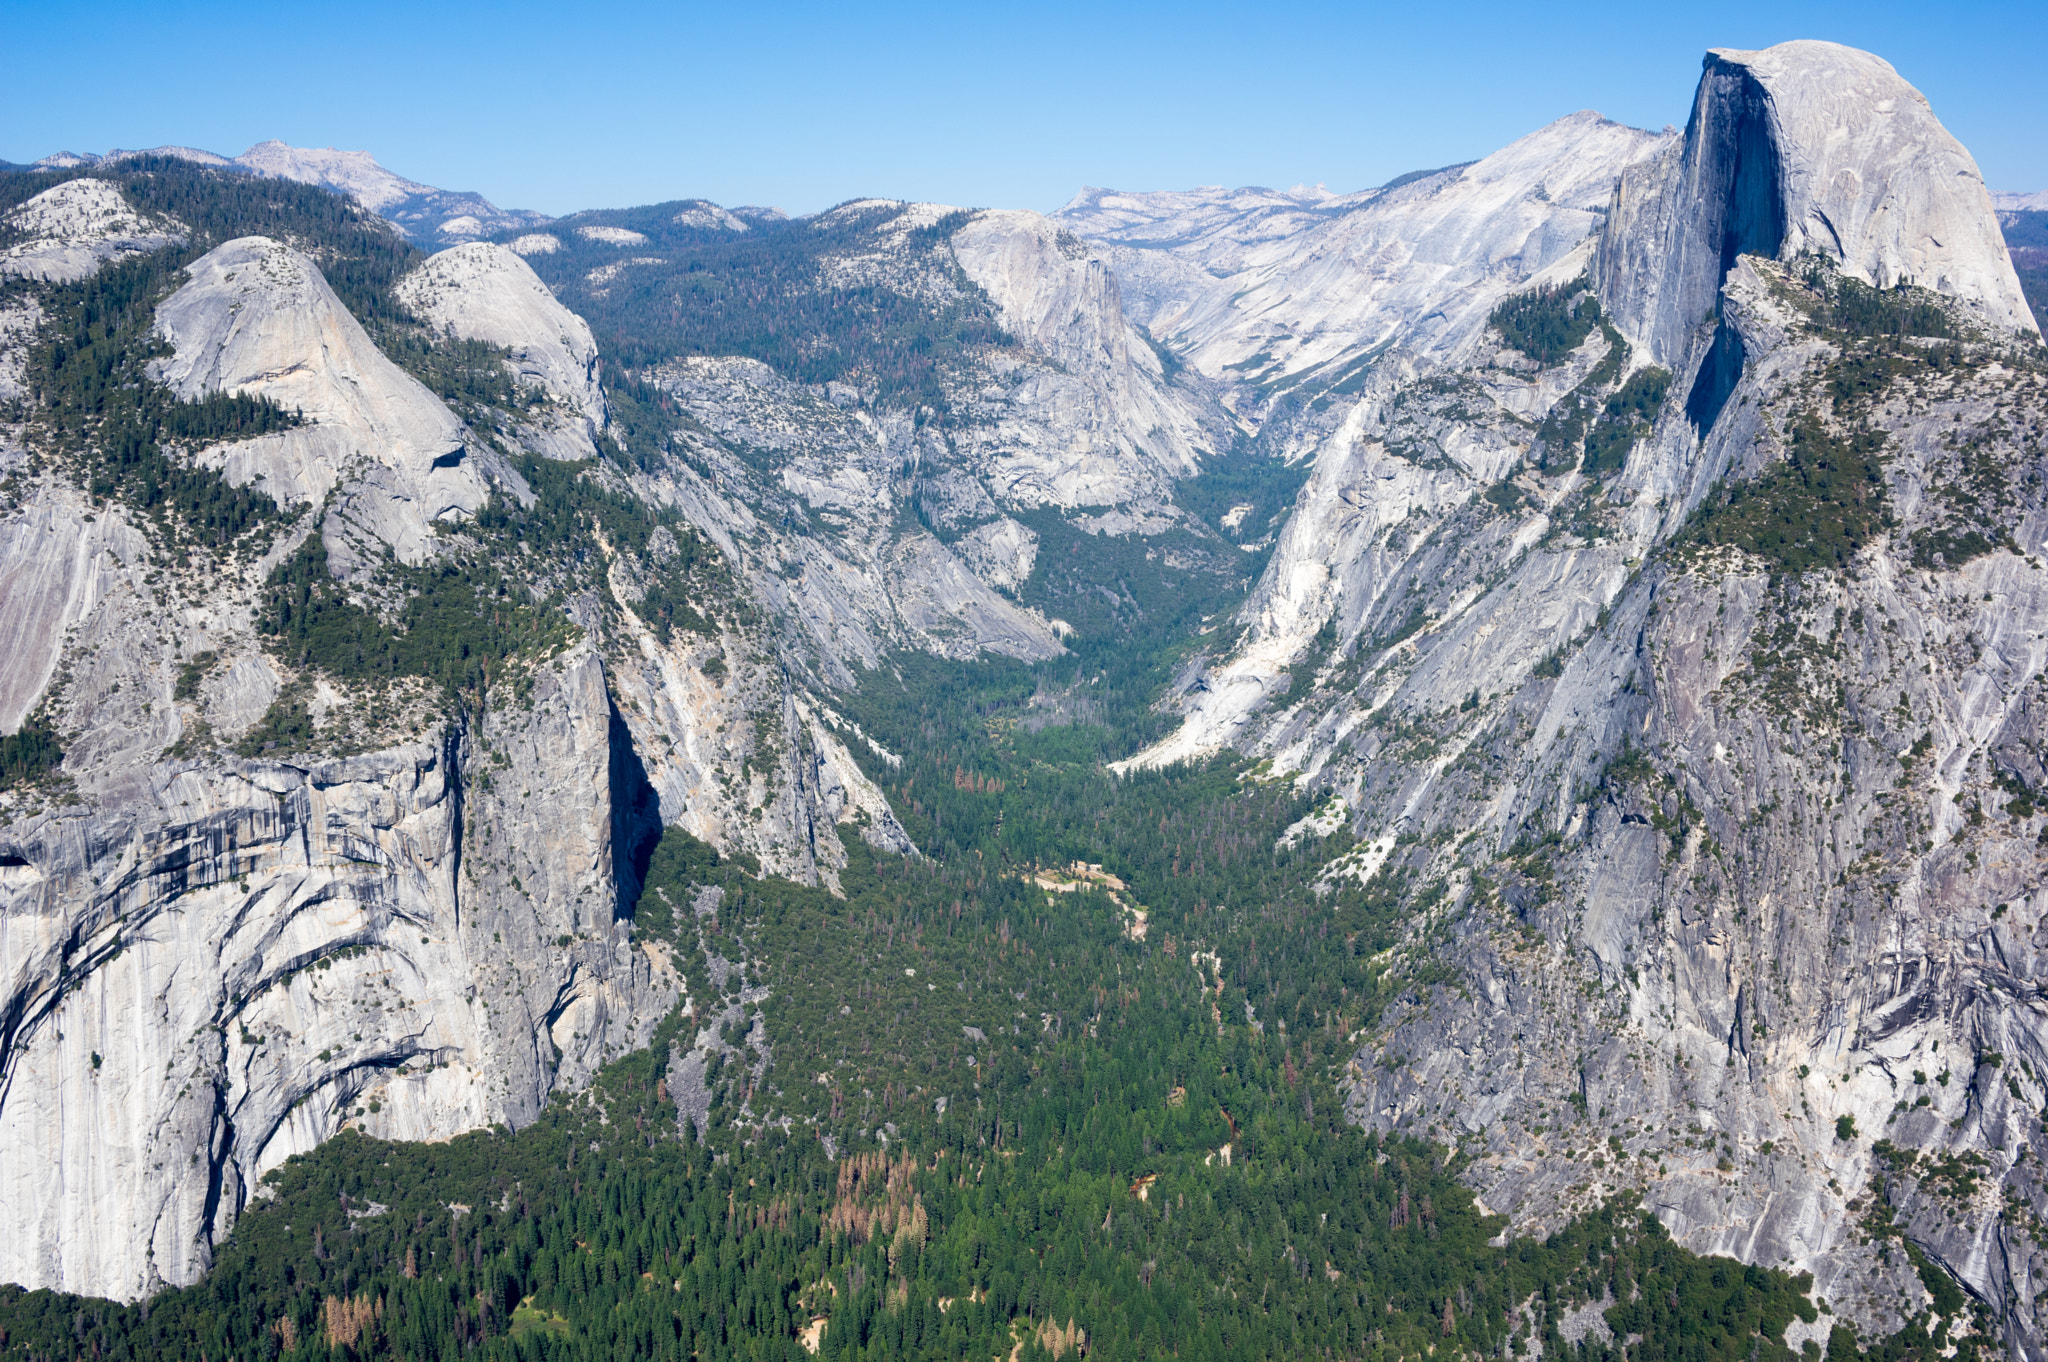 HD Pentax DA 21mm F3.2 AL Limited sample photo. Half dome and yosemite valley from glacier point photography